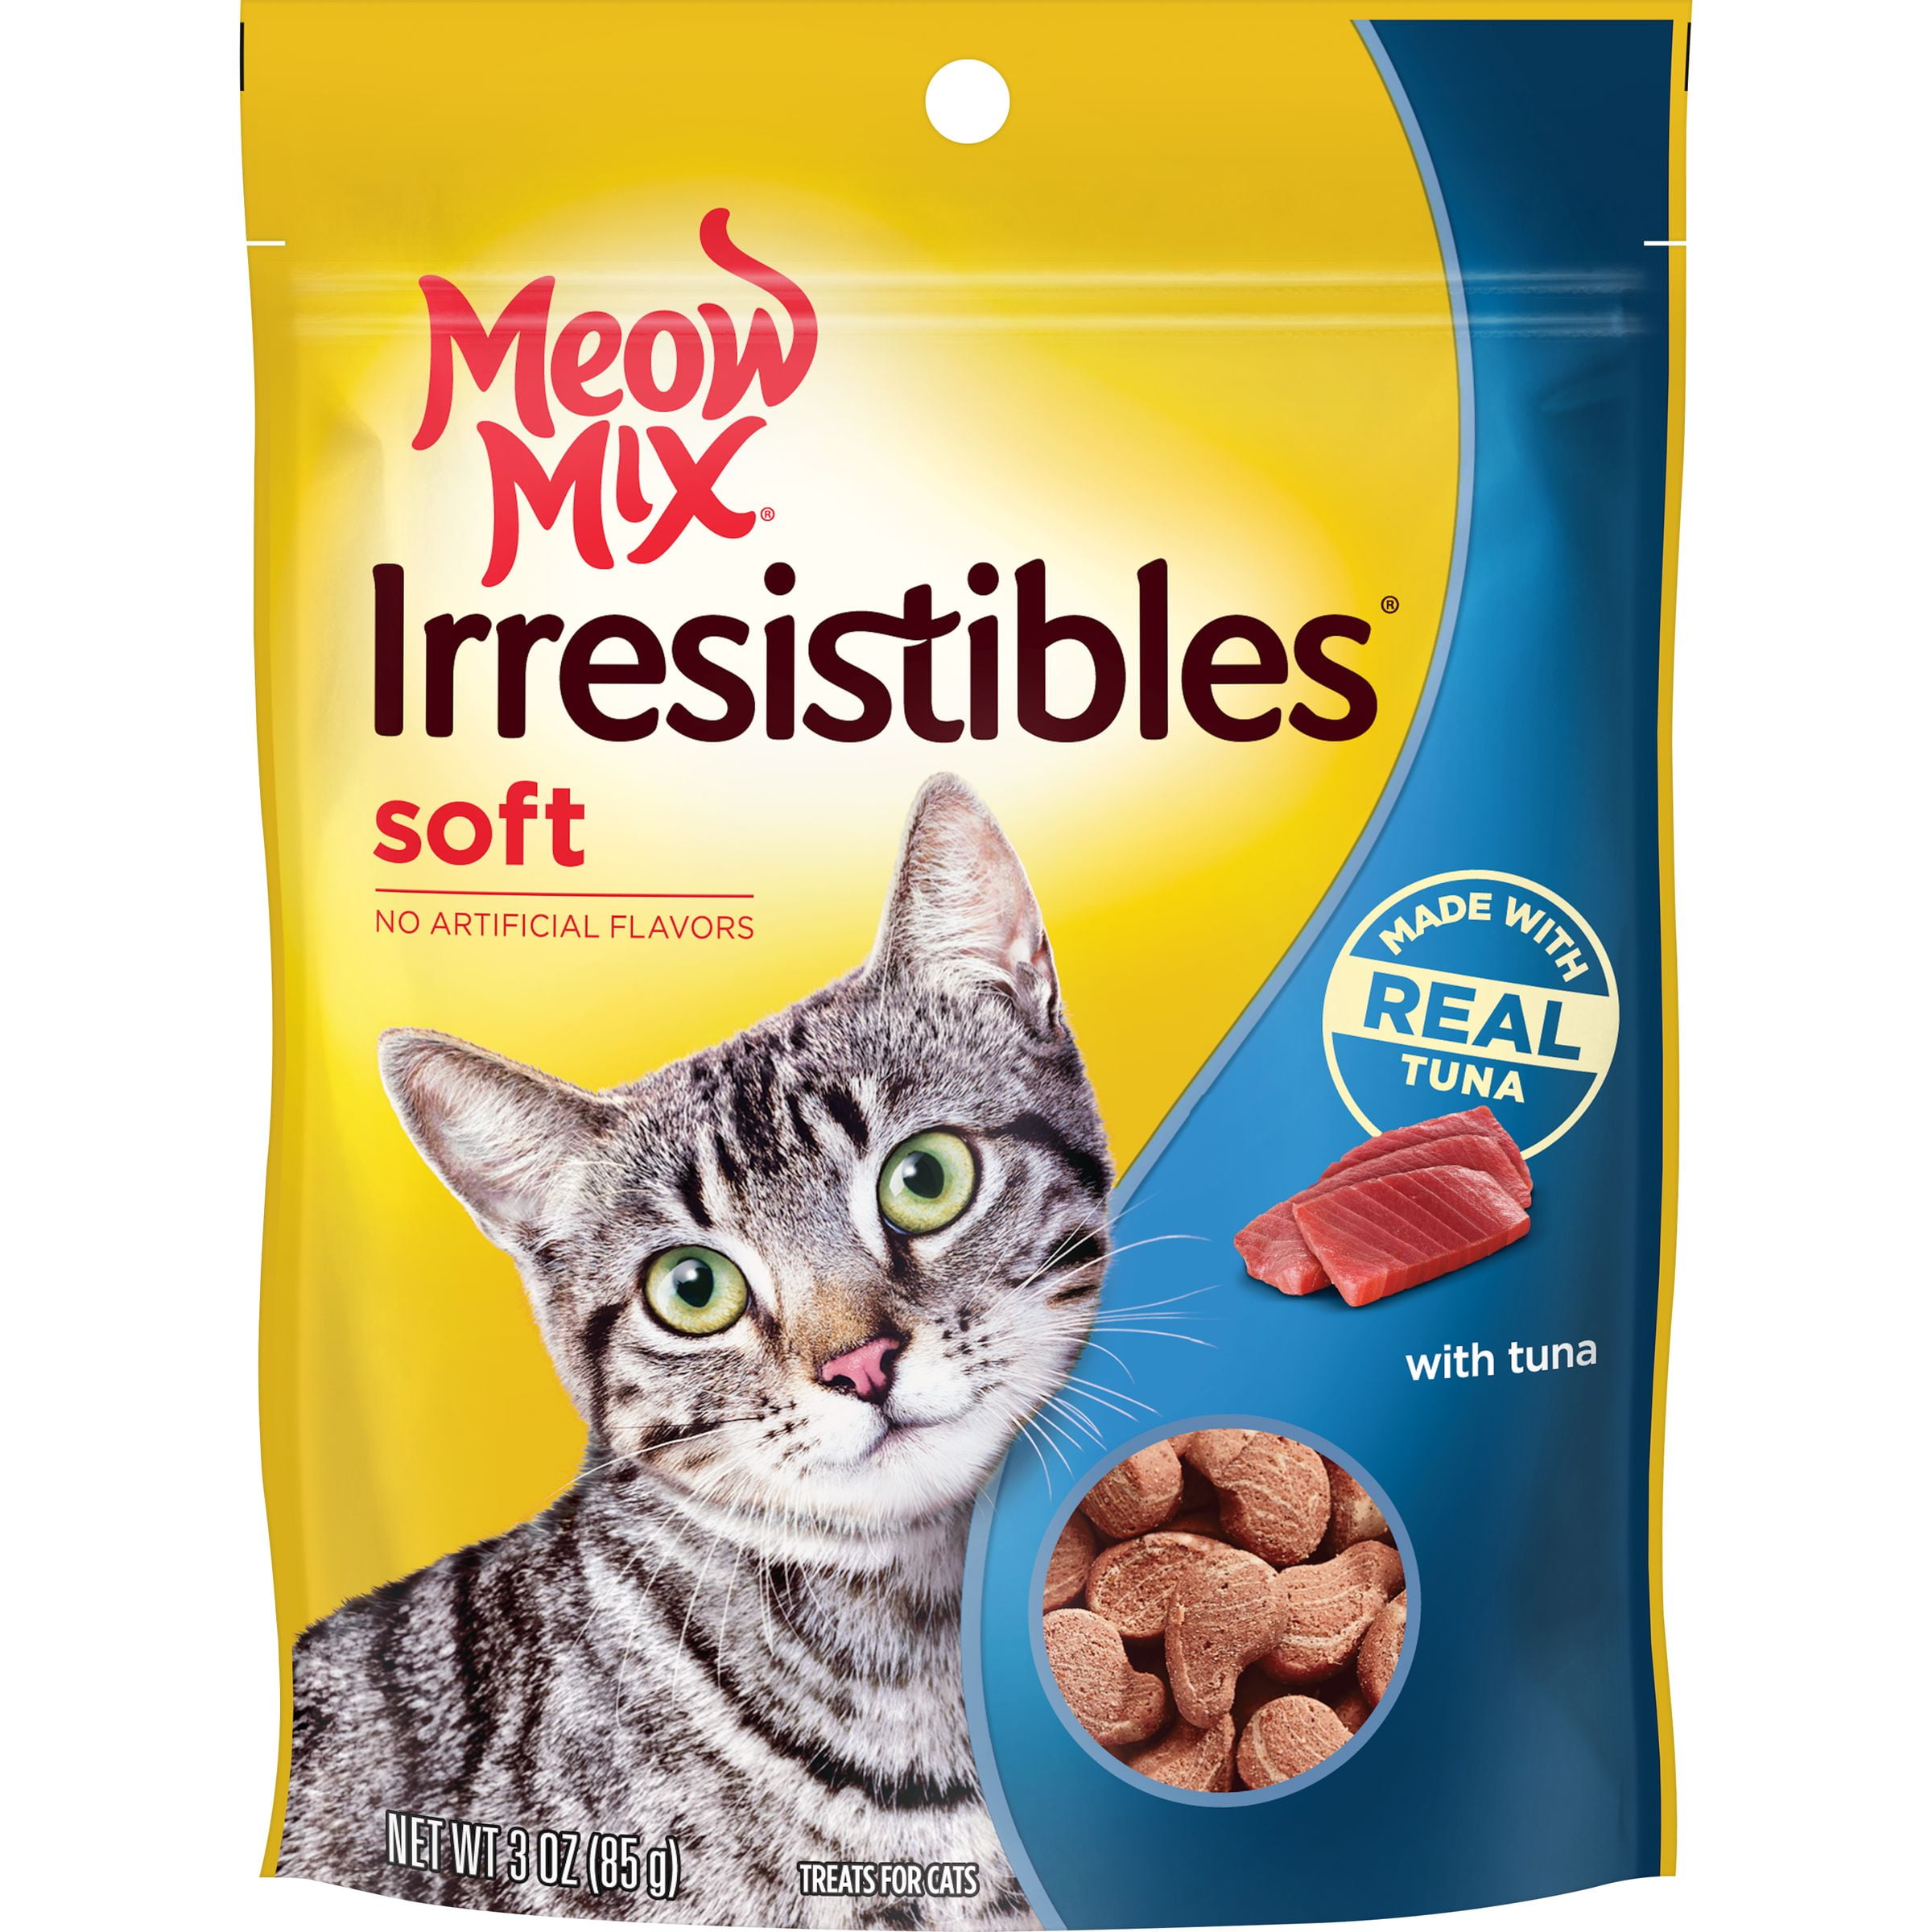 Meow Mix Irresistibles Cat Treats, Soft With Tuna, 3Ounce Bag